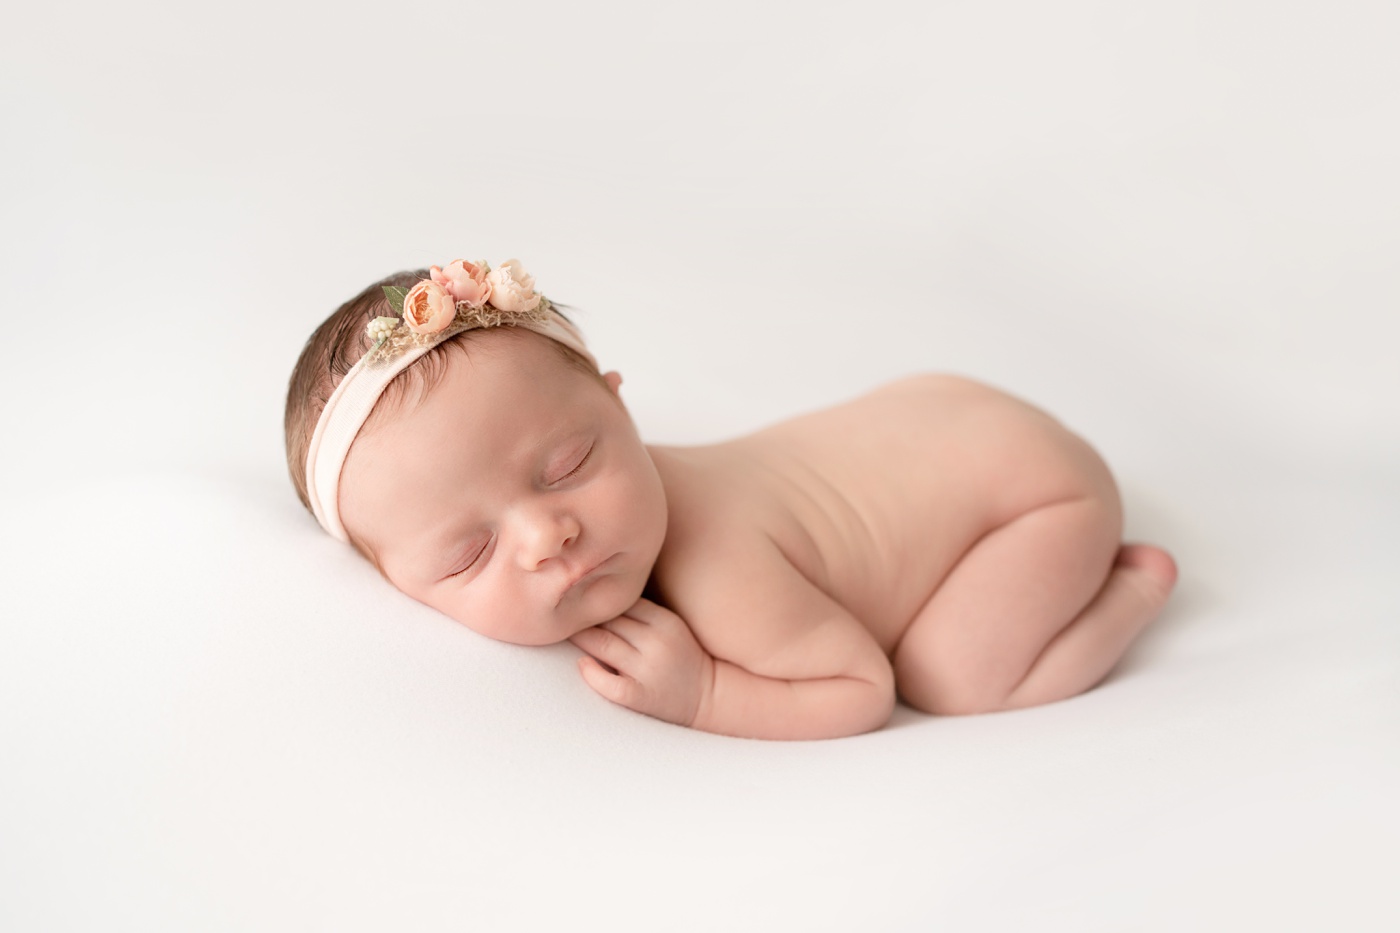  newborn baby girl laying on cream backdrop woith a pink headband sleeping curled up with her hand under her chin